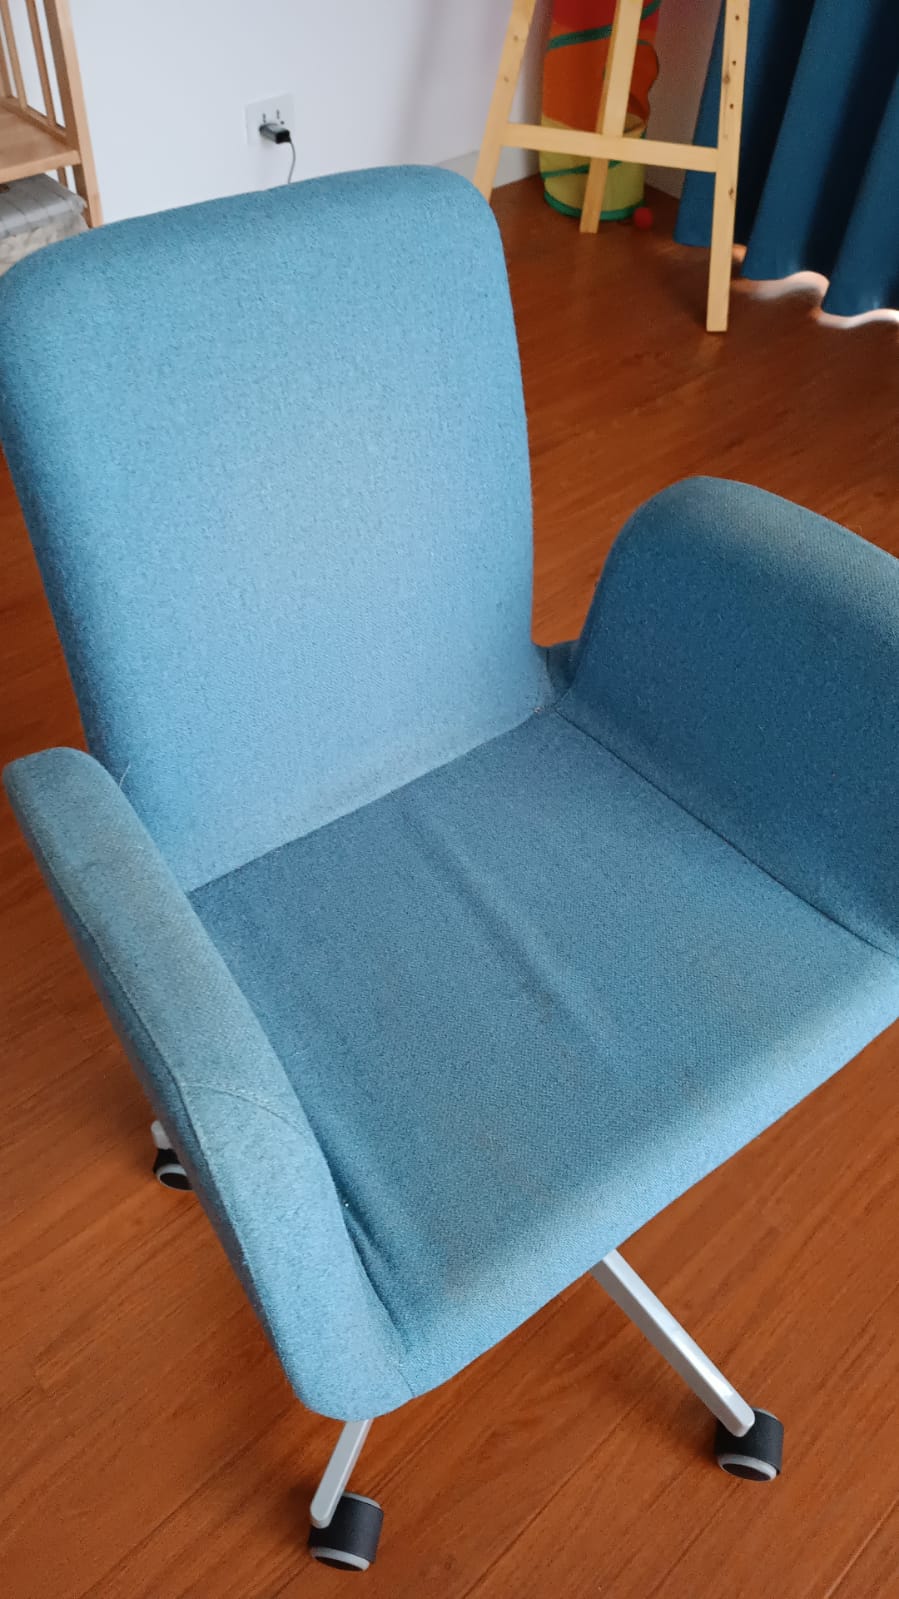 Upholstery steam cleaning